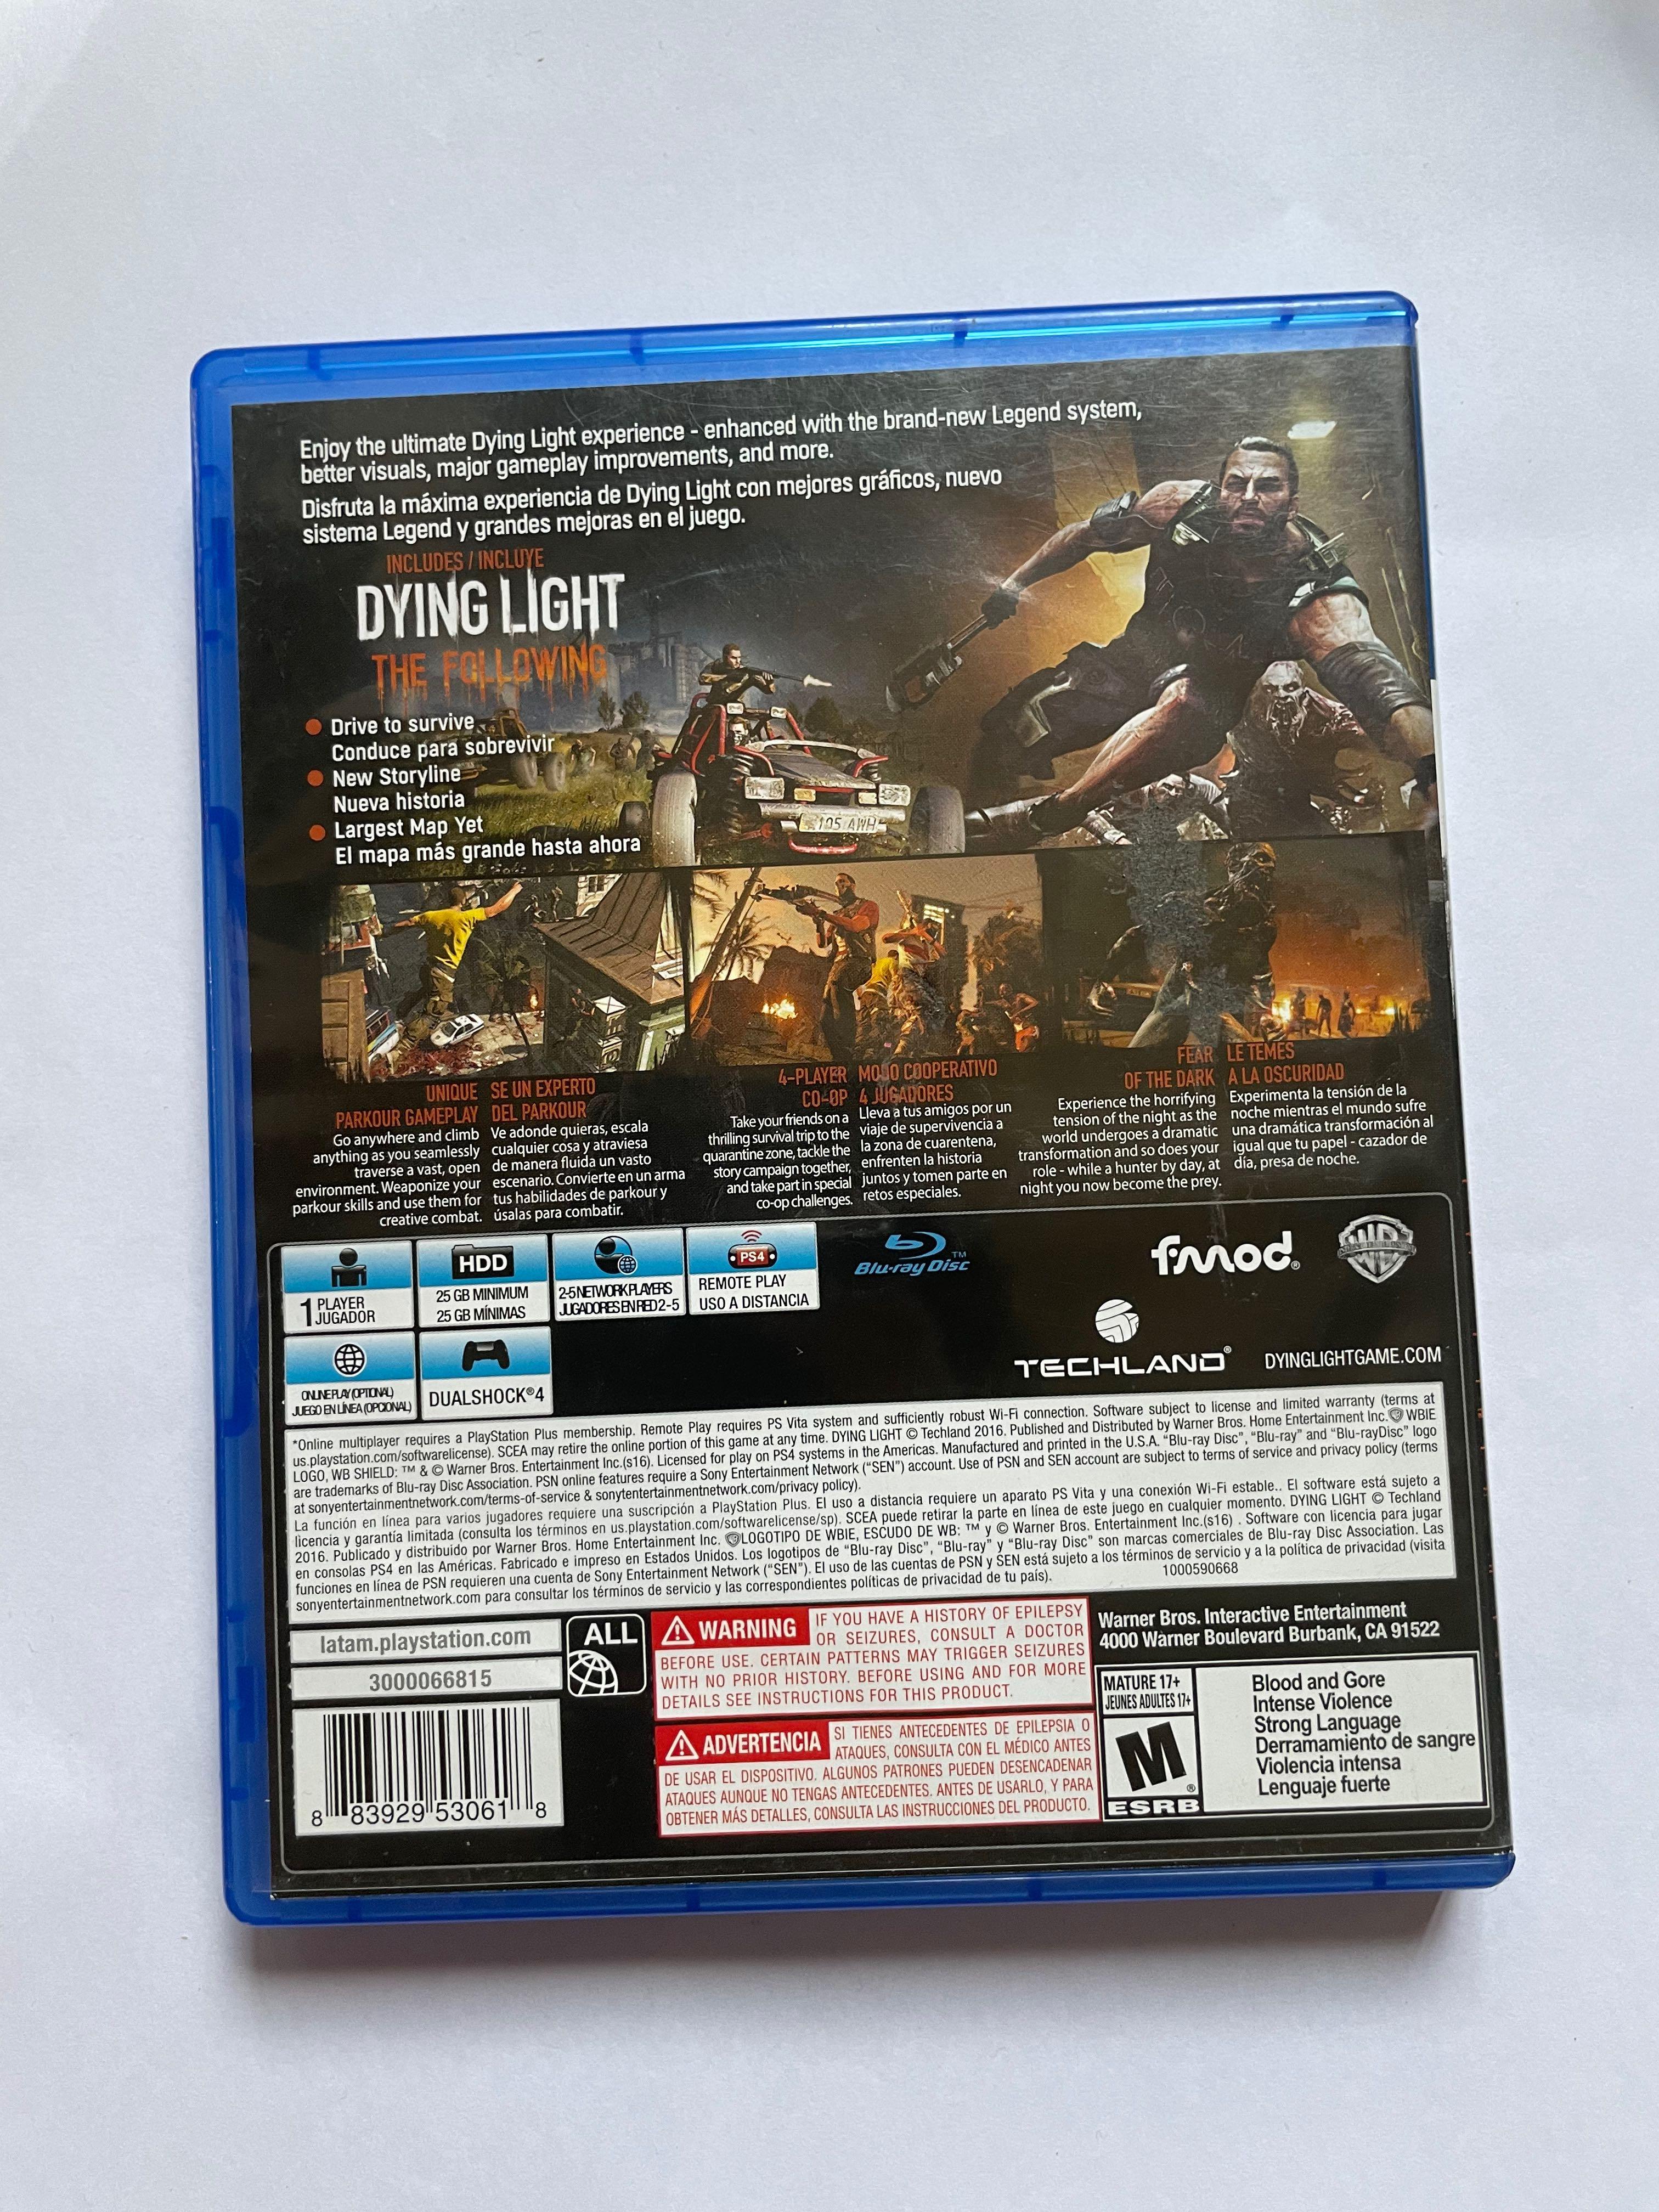 Dying Light: The Following - Enhanced Edition (PS4) - The Cover Project